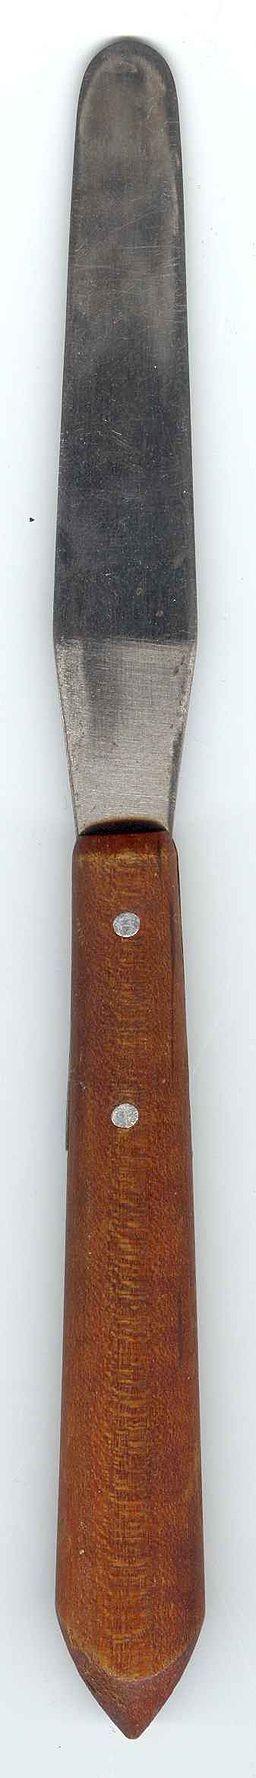 image of a palette knife with a broad, flat, flexible blade